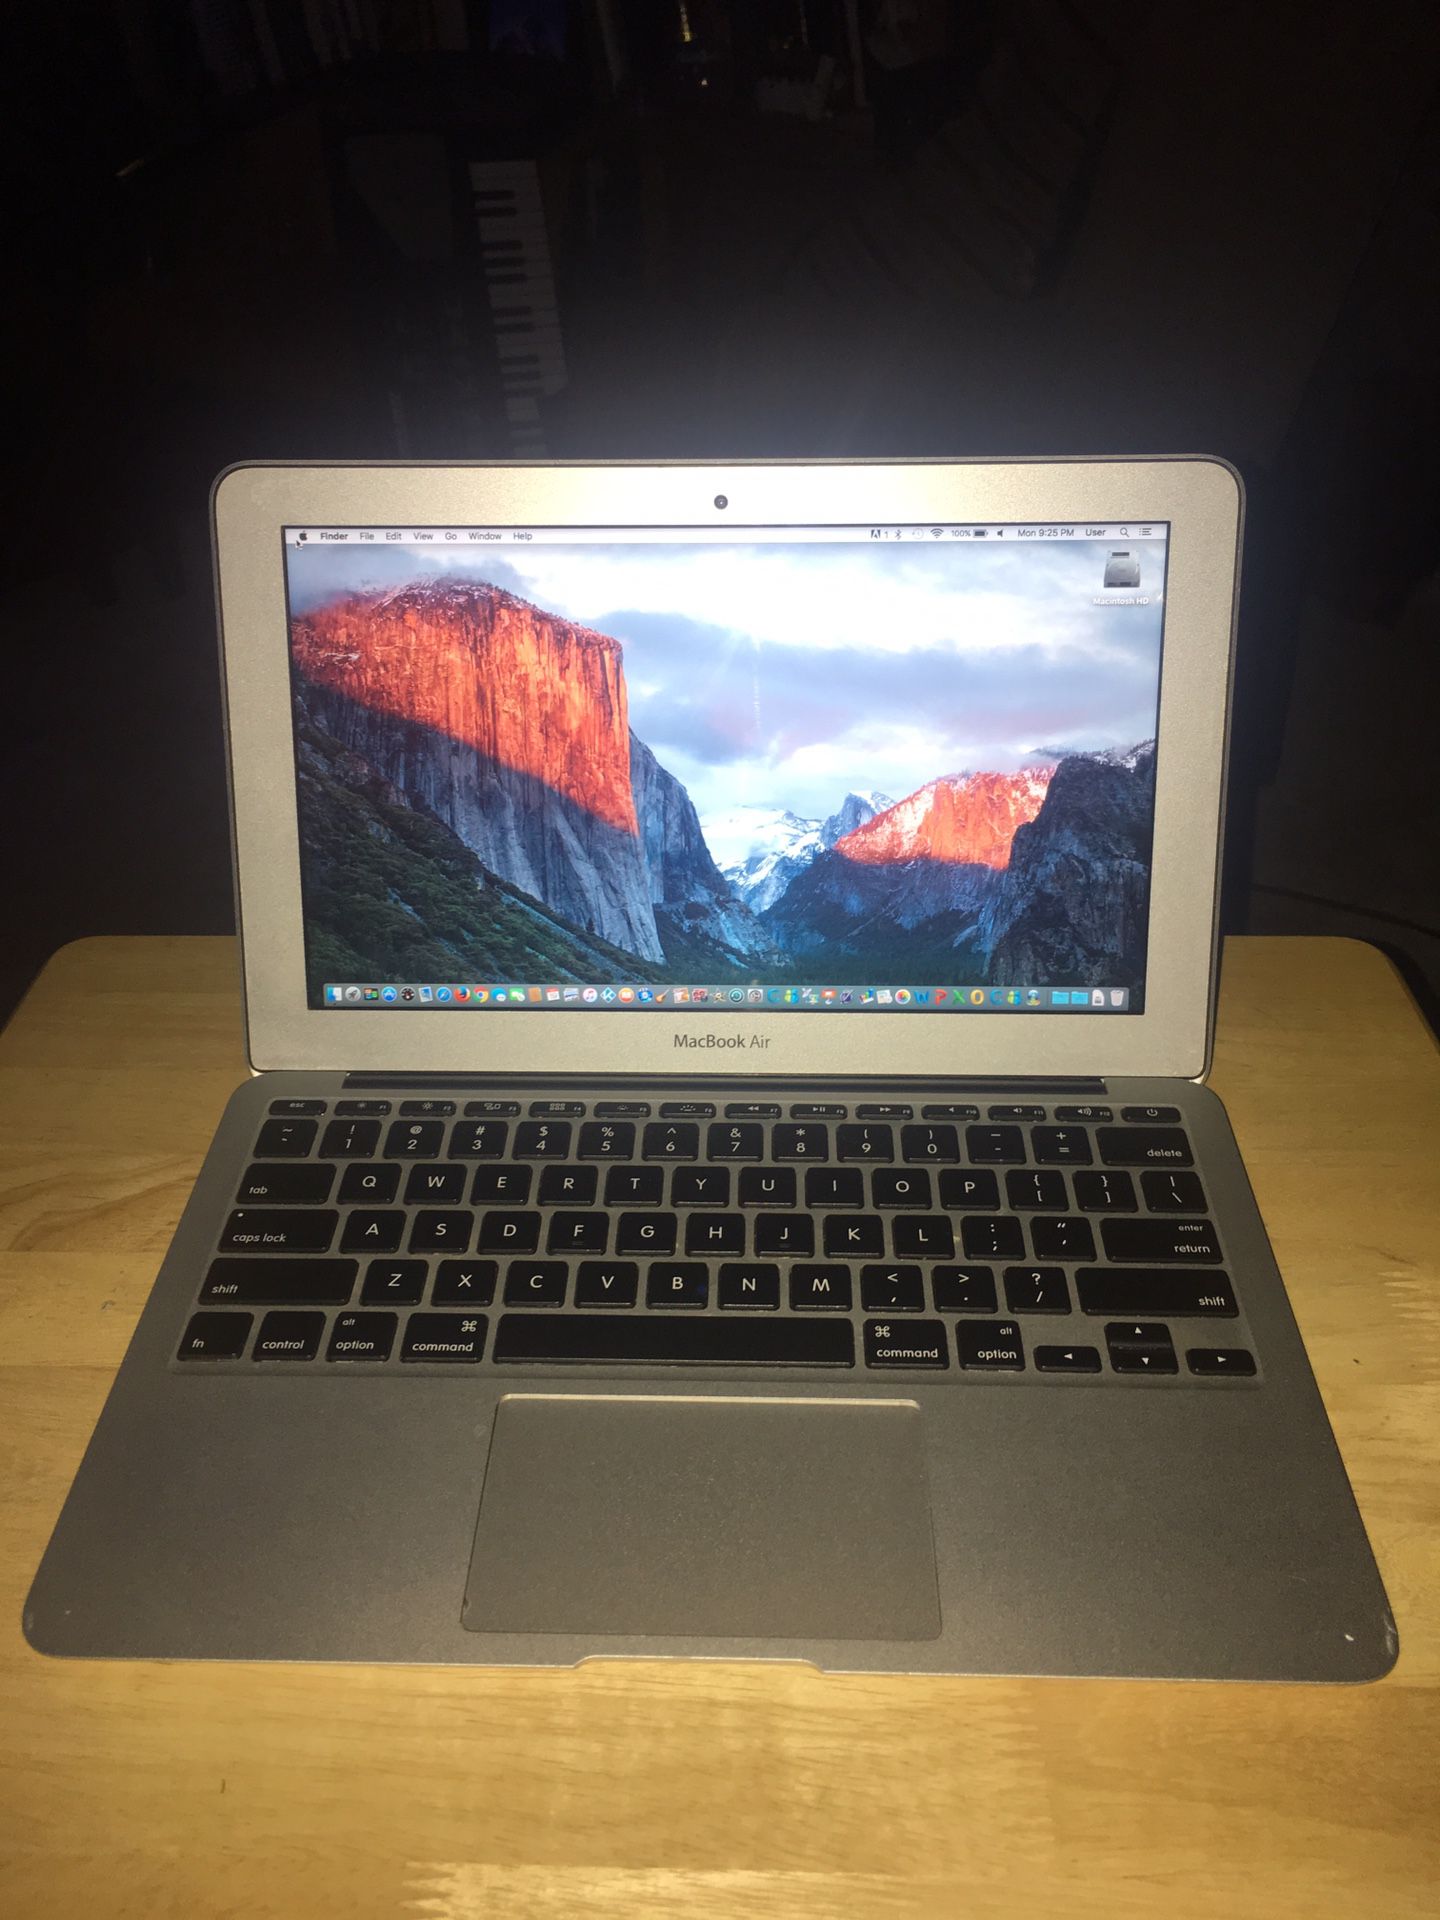 *TINY!* 2014 11.6” MacBook Air - 8 Gigs MEM! -Tons Of Software! Barely Used!-Only 27 Battery Cycles!